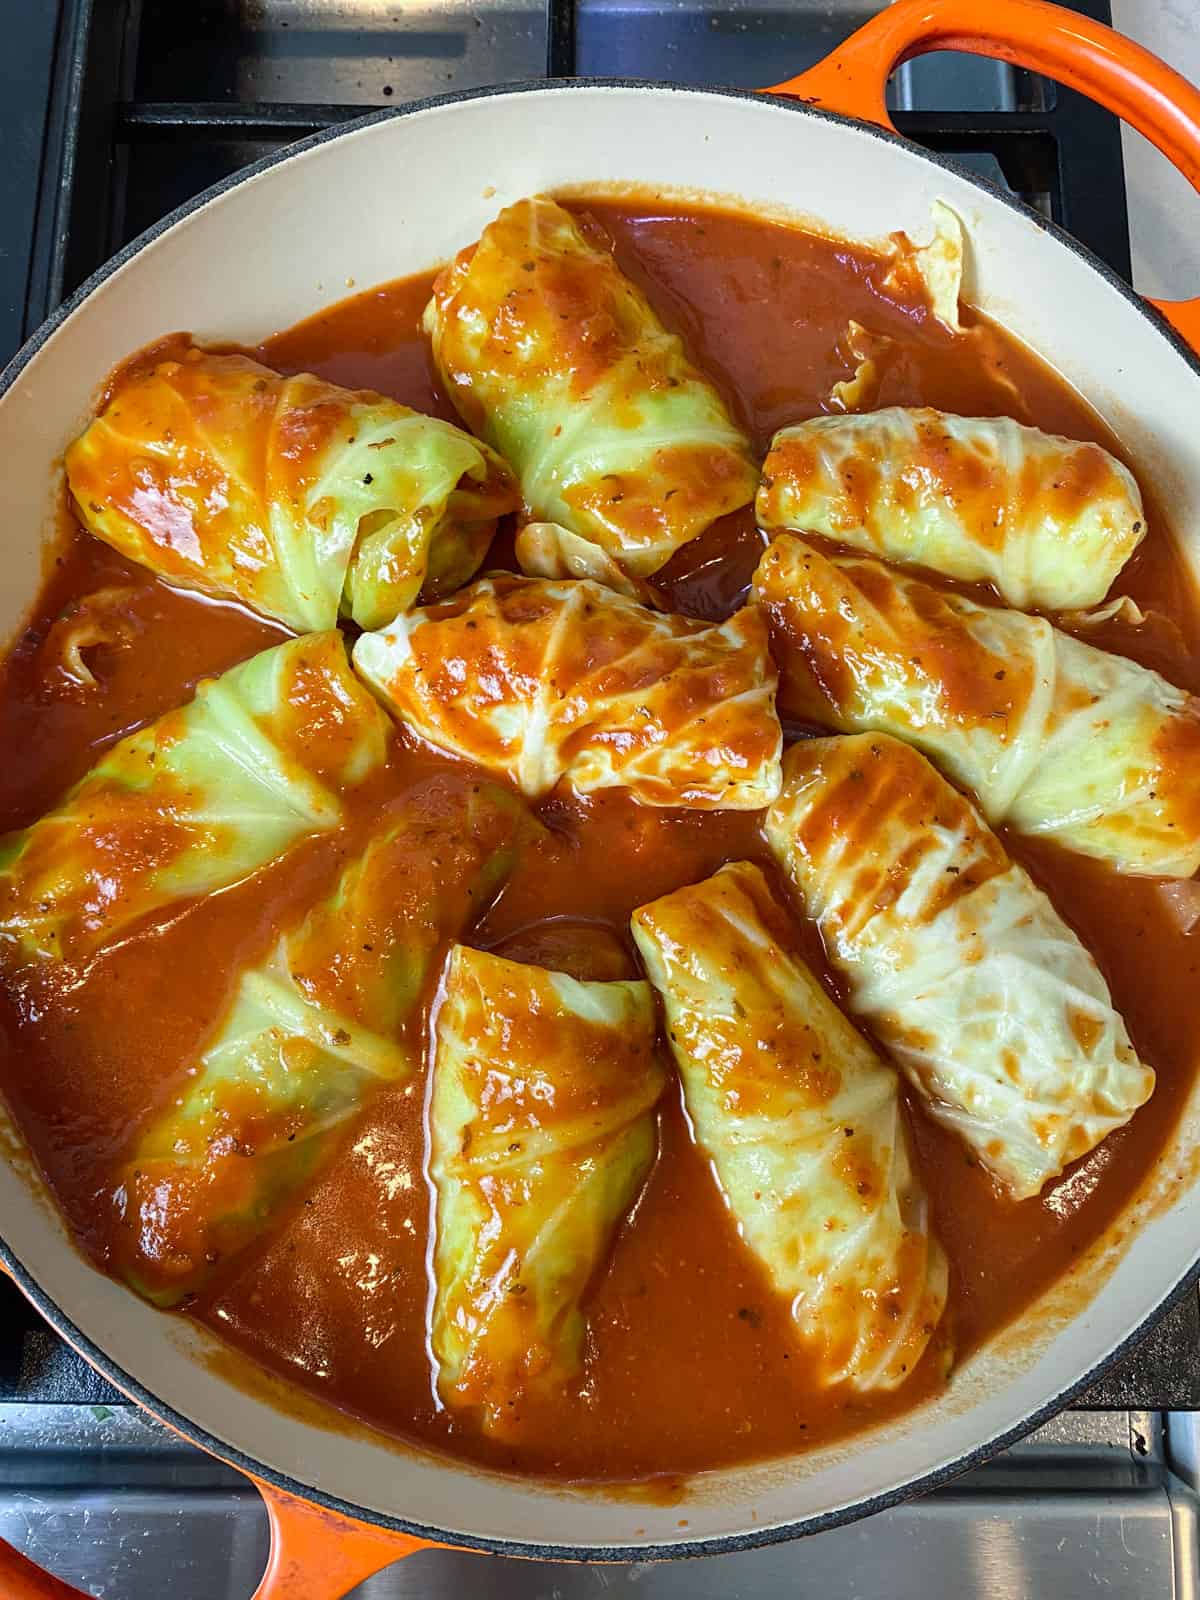 Pour the sweet and sour tomato sauce over the rolled cabbage rolls.